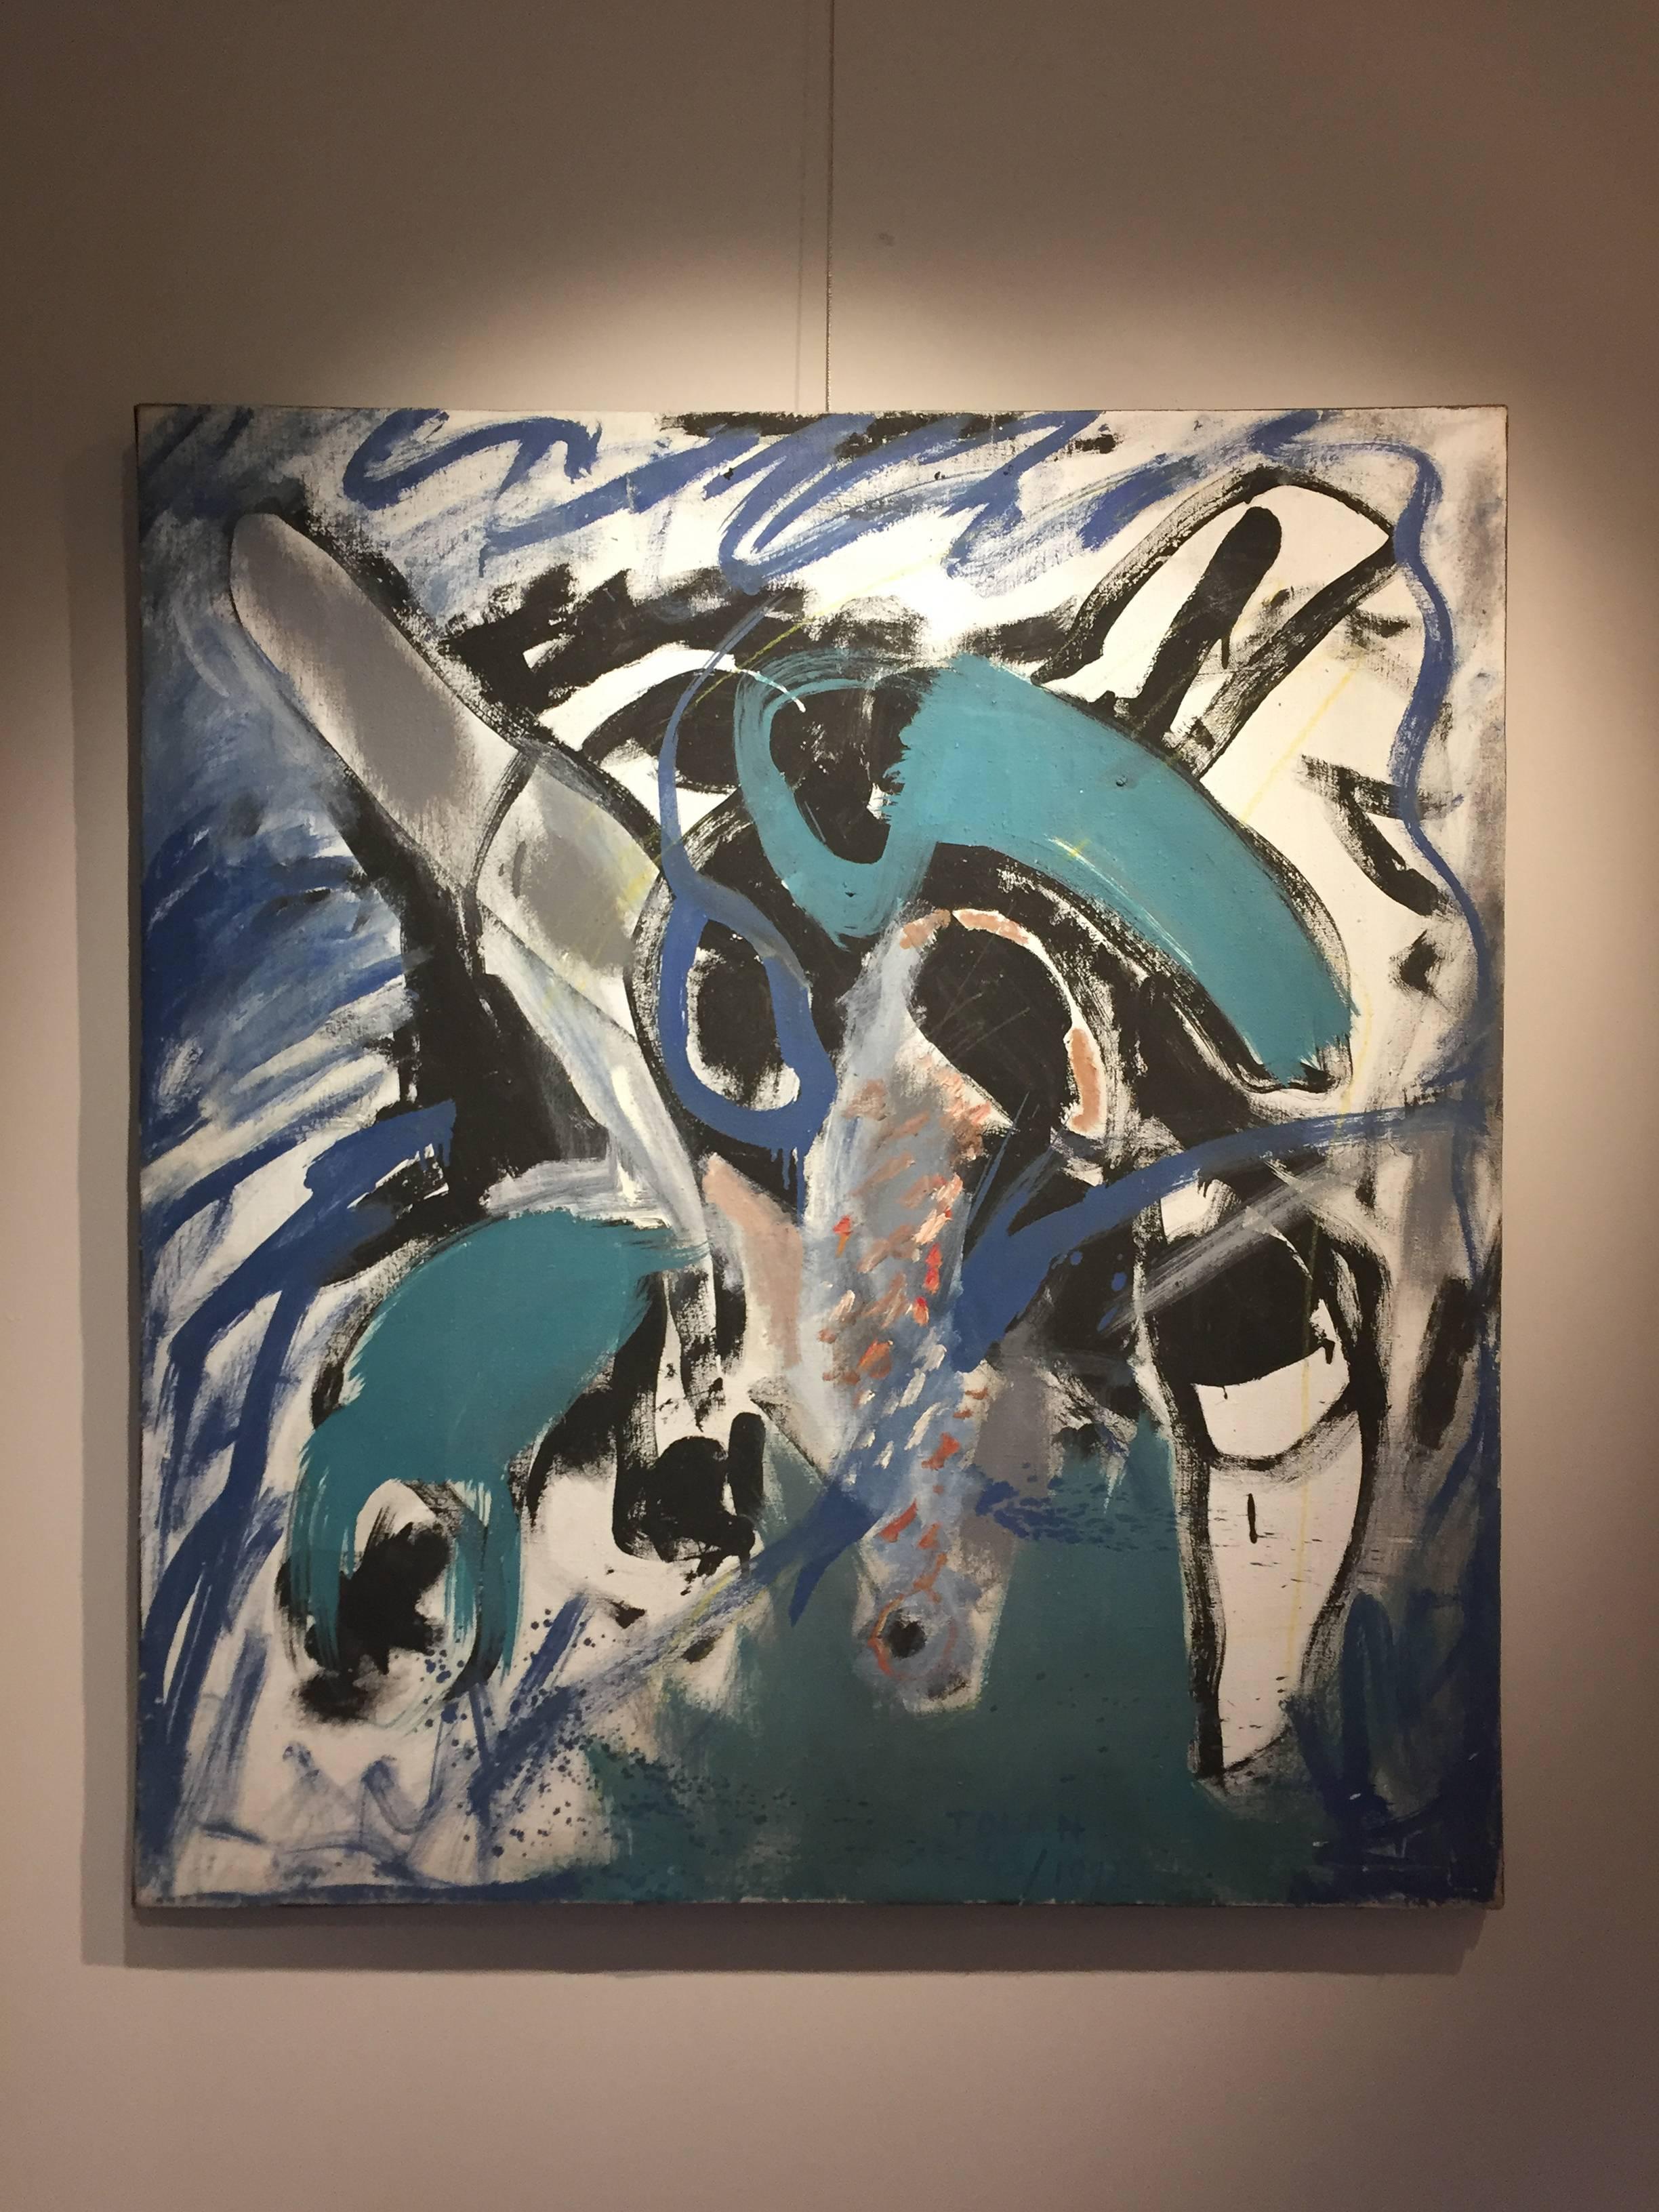 A large abstract painting by Vasile Tolan (b.1953, Bucharest).
Oil on canvas, powerful polychrome composition in blues, white and black, with hints of coral orange.
Signed and dated 1992.
Measures: 96 cm high by 88 cm wide.